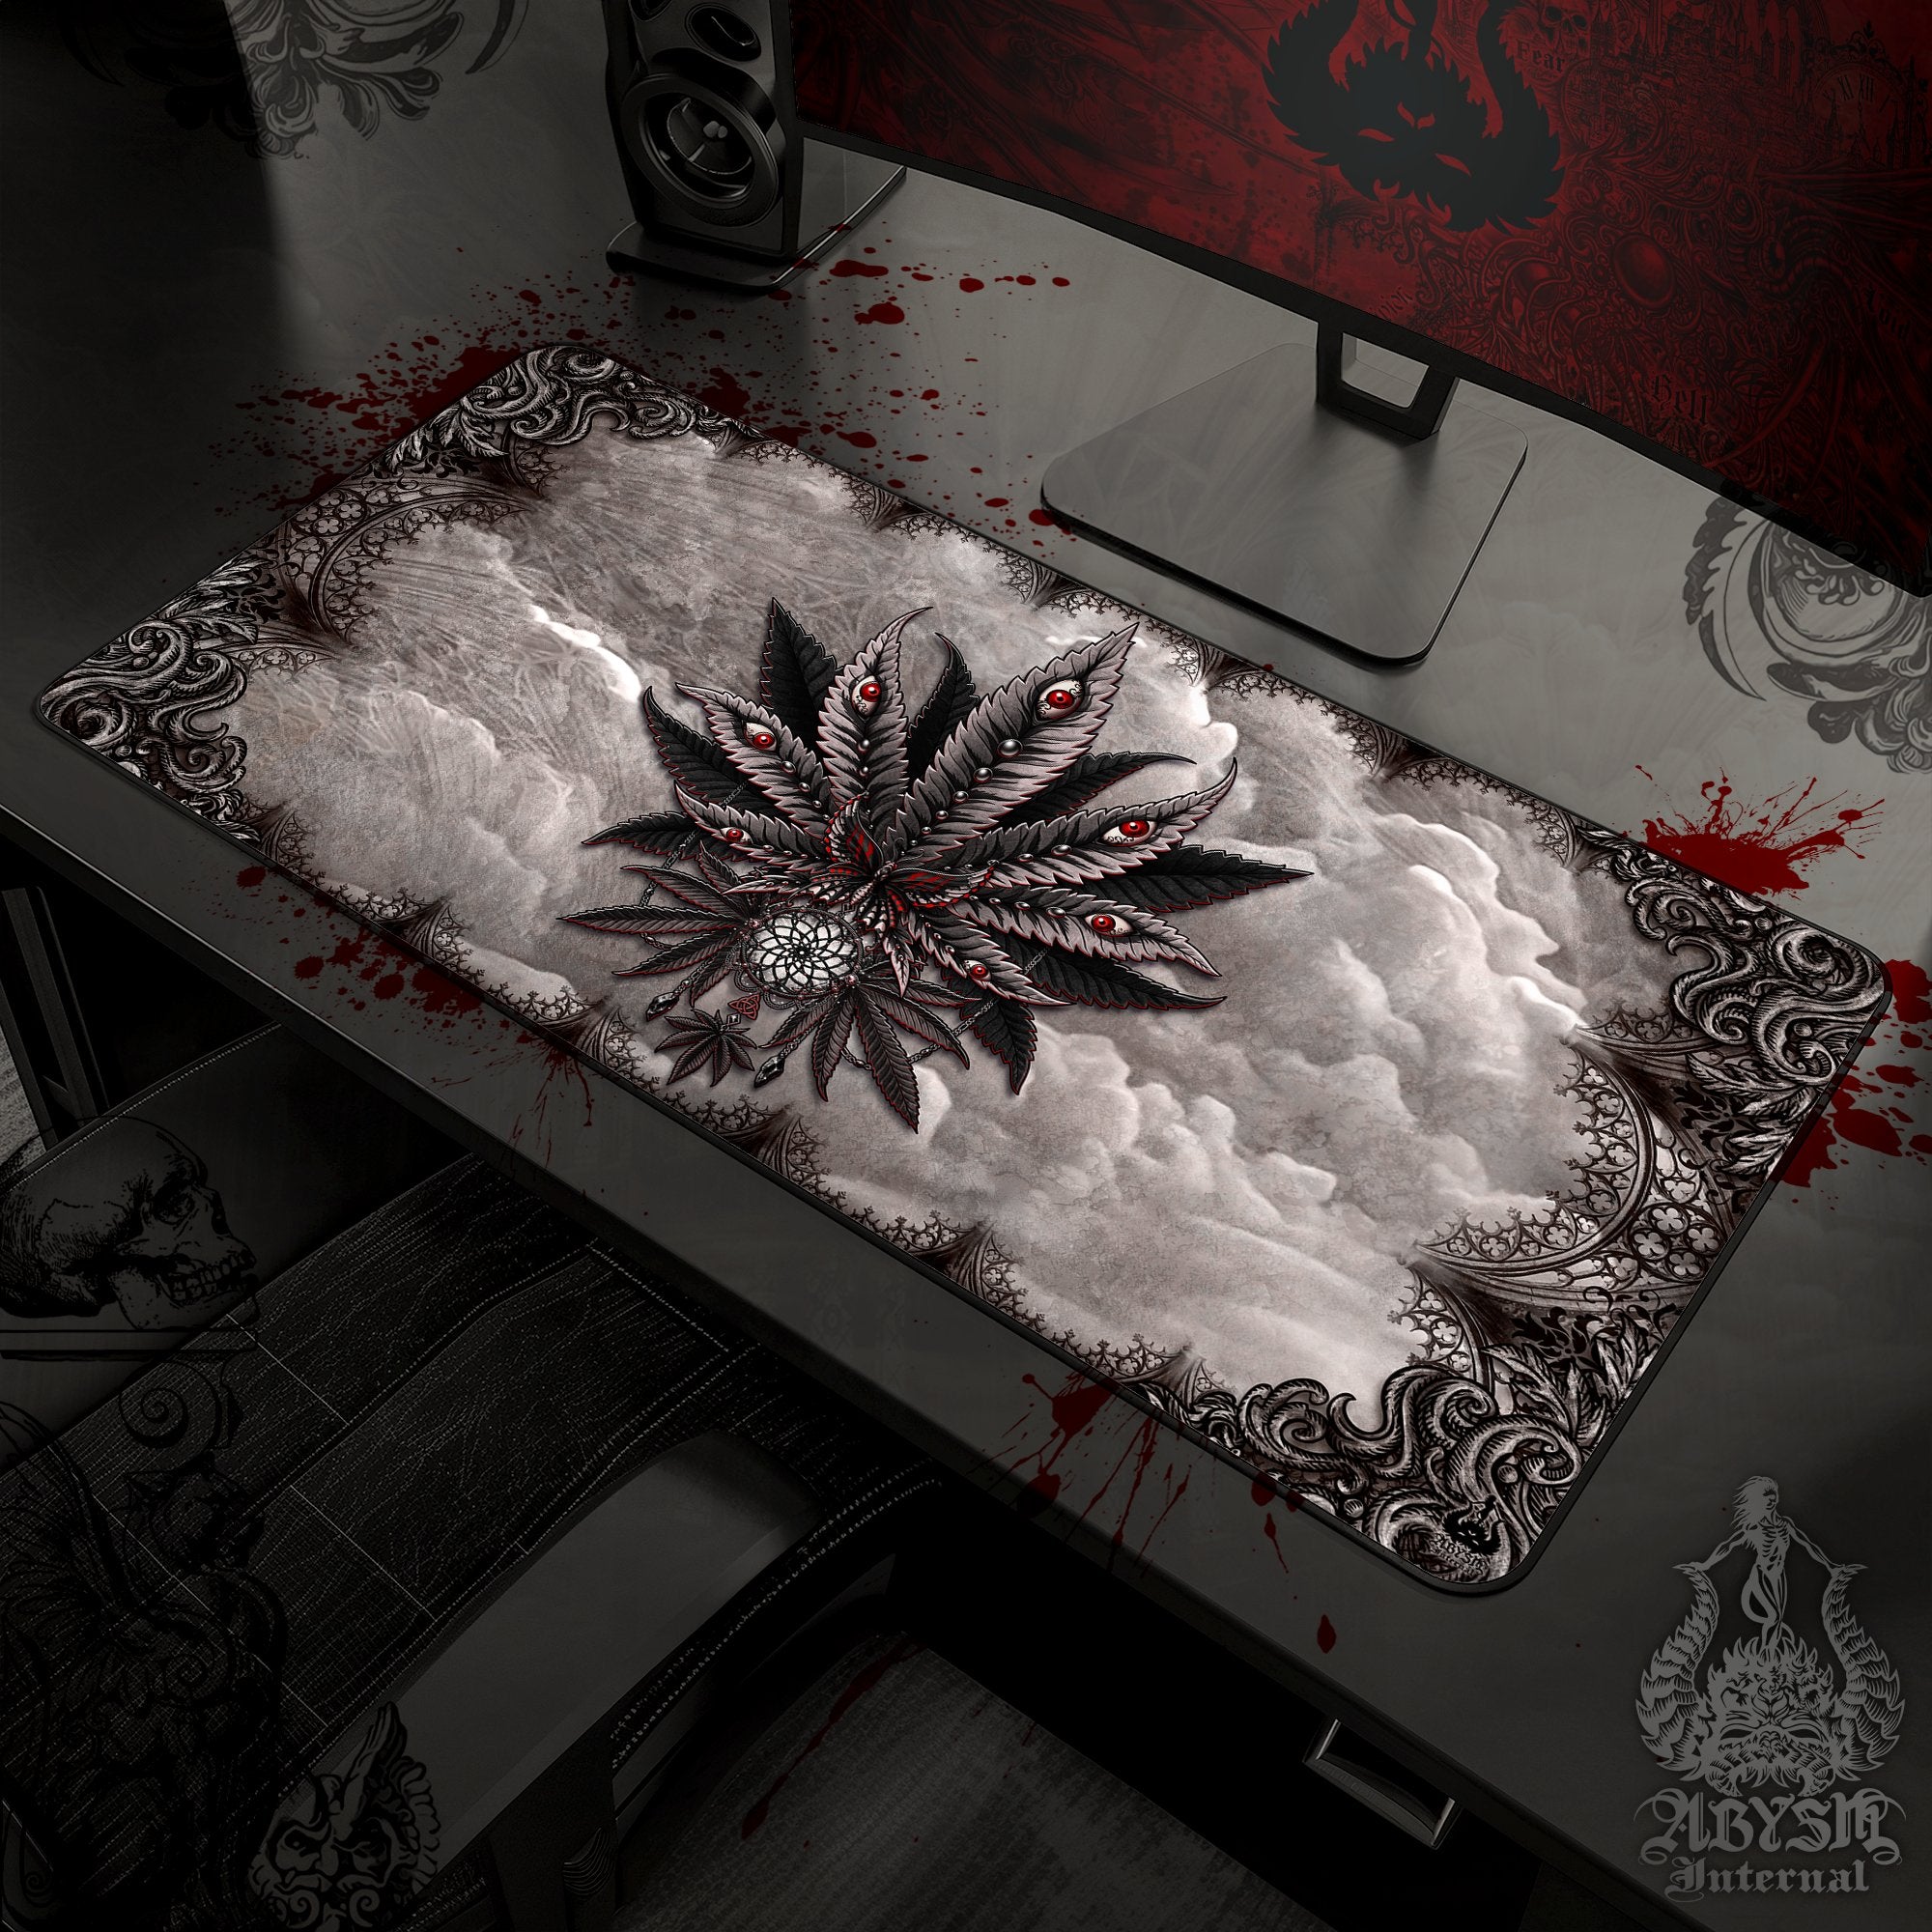 Gothic Desk Mat, Marijuana Gaming Mouse Pad, Cannabis Table Protector Cover, Weed Workpad, Horror 420 Art Print - Beige, Grey, 2 Colors - Abysm Internal